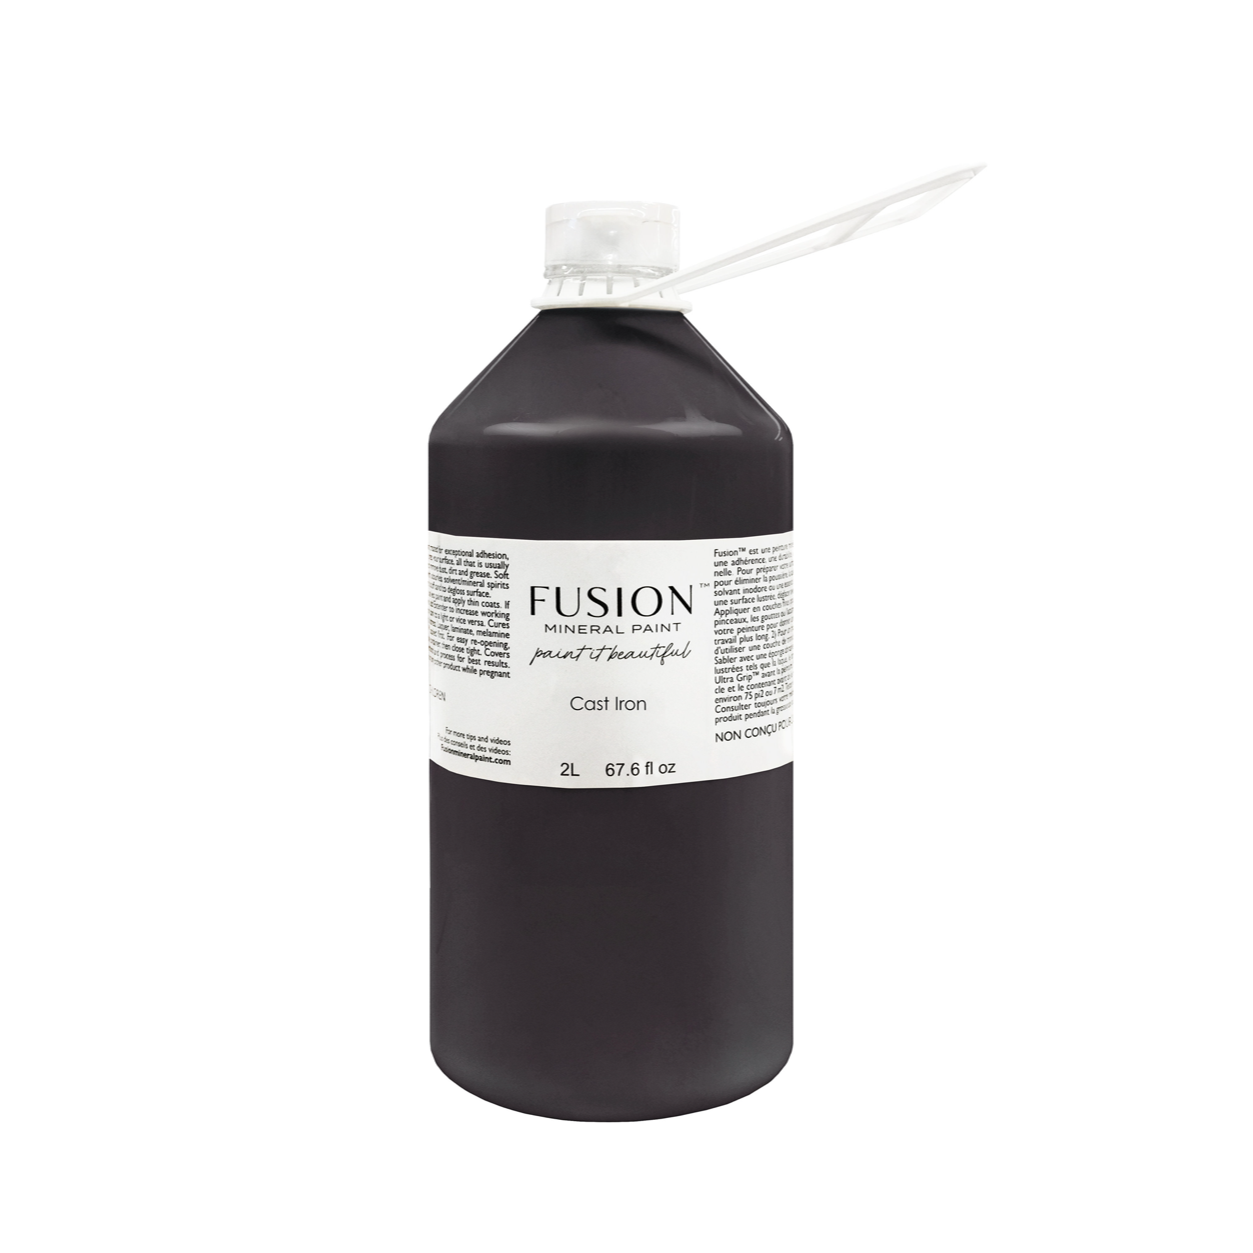 Fusion Mineral Paint 2 Litre Cast Iron at Home Smith